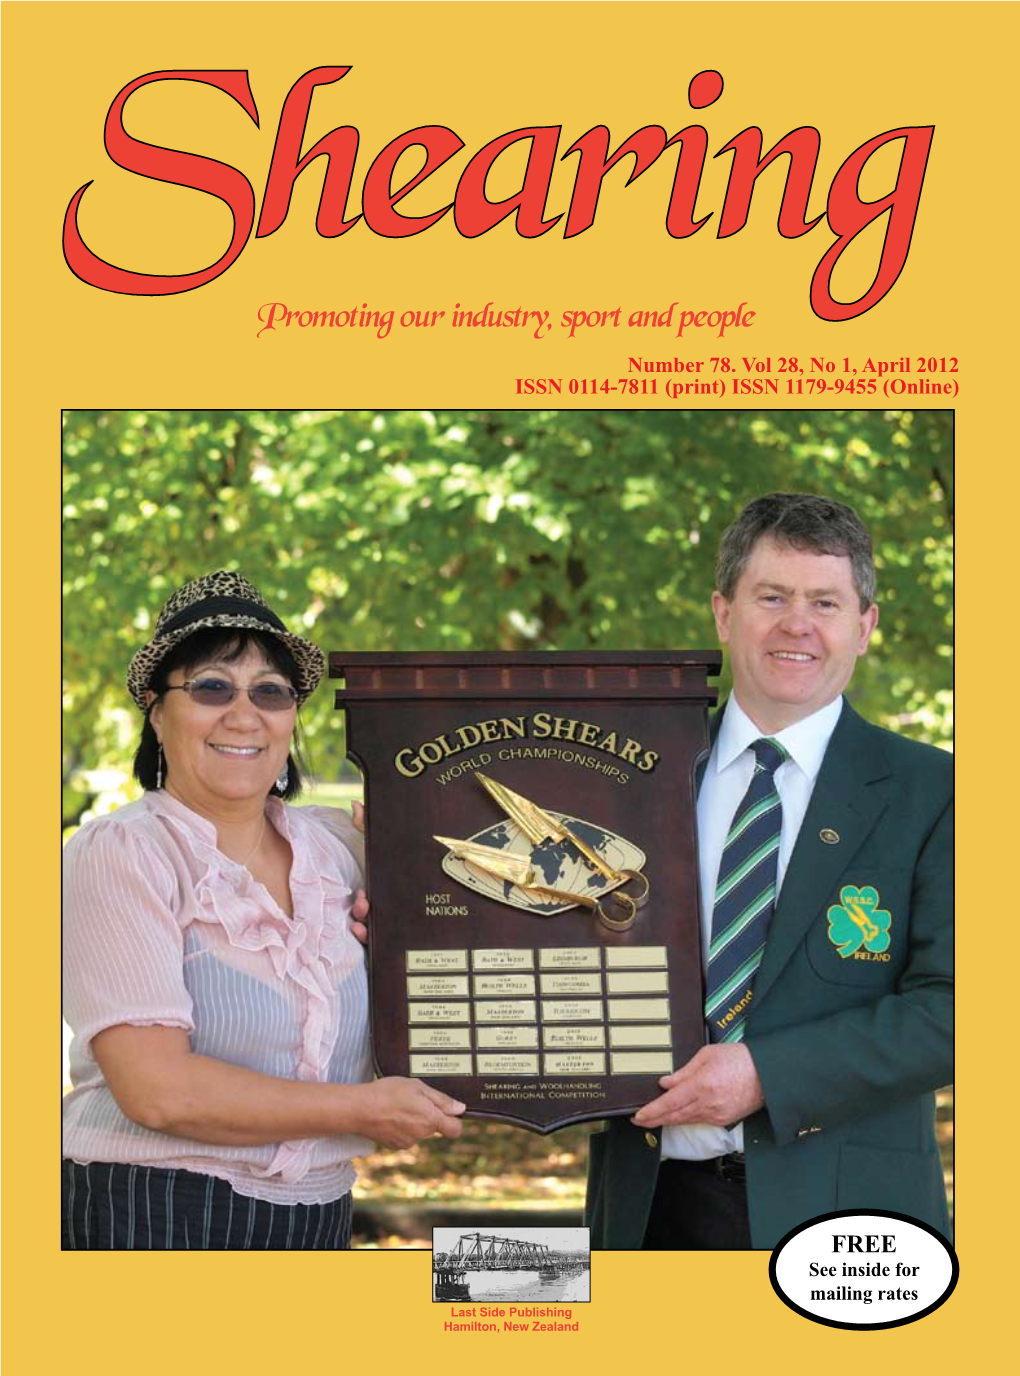 Shearing Magazine on Line at Shearing Promoting Our Industry, Sport and People Number 78